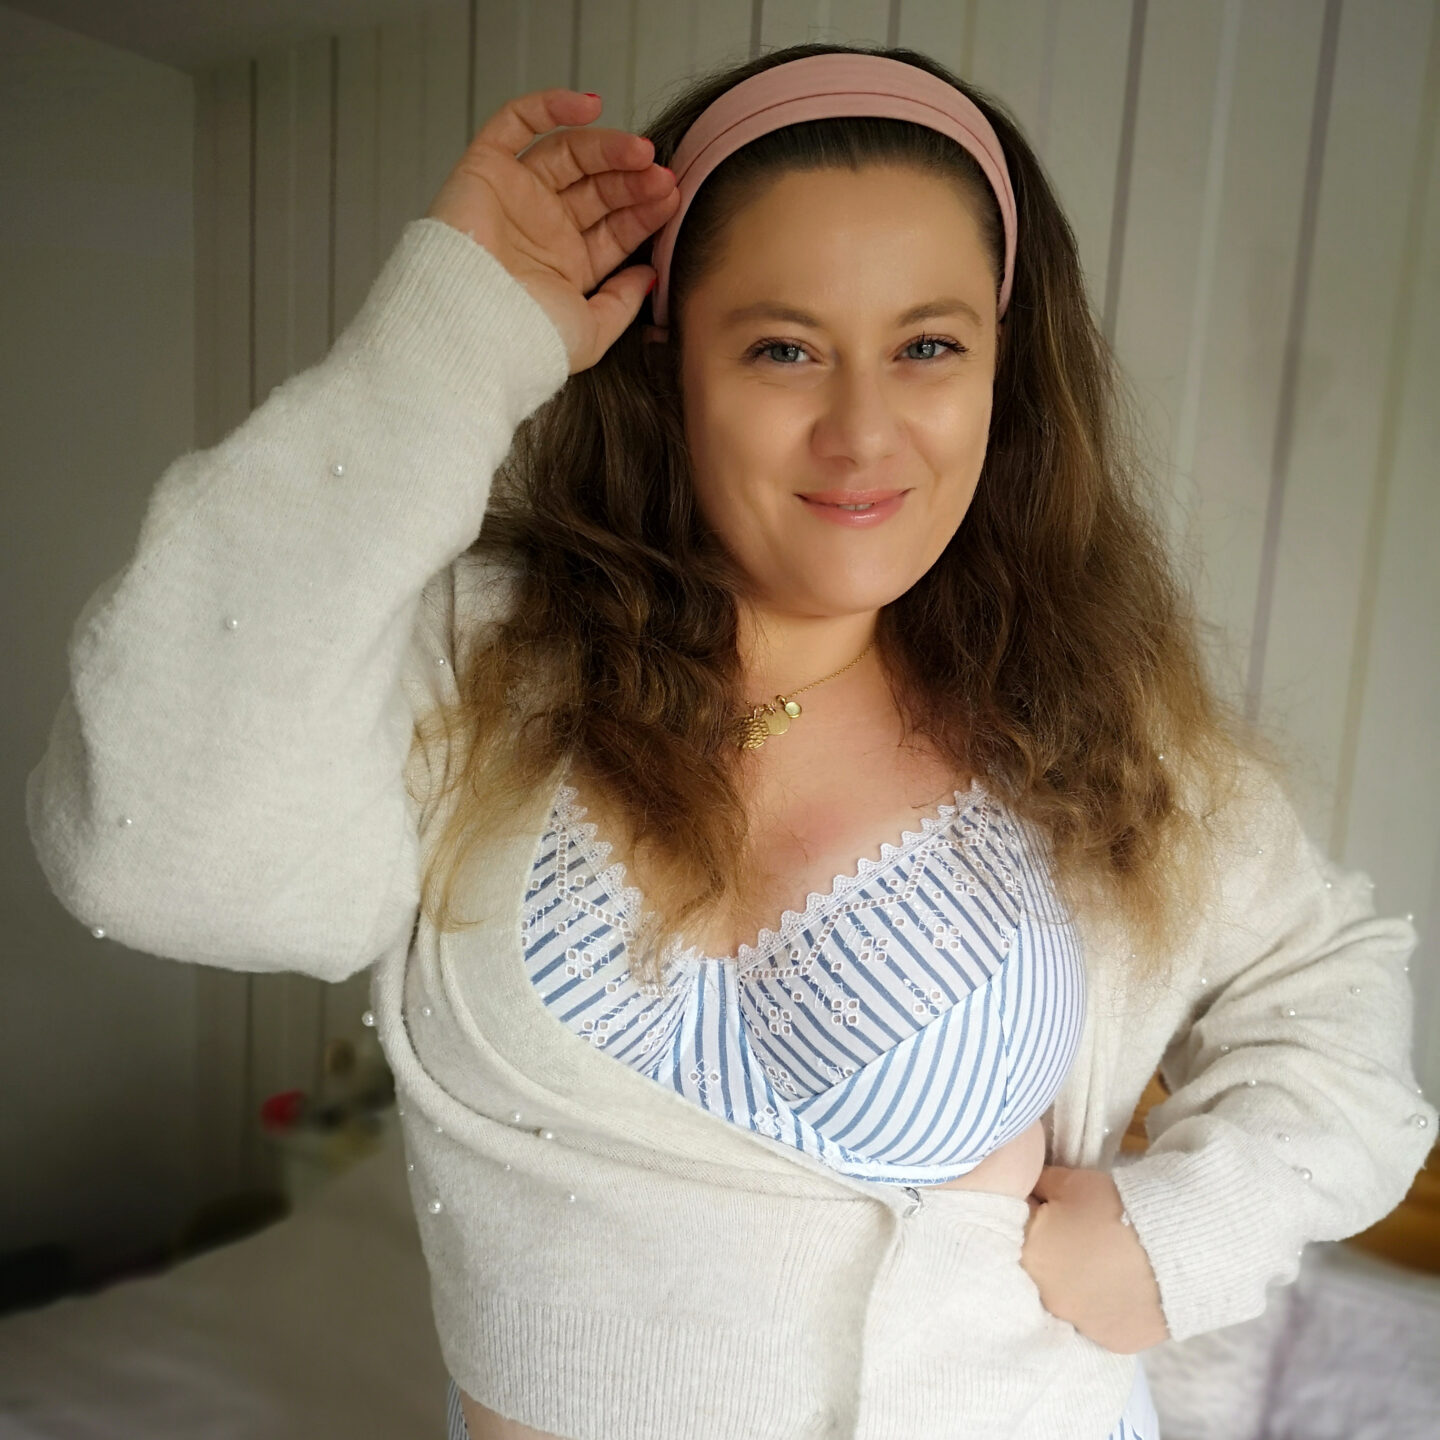 Jubilee Giveaway, Maison Lejaby, French Lingerie, Natural Curves, Celebrate Women, French Brand, Maison Lejaby Paris, the Frenchie Mummy, Giveaway, Win, Competition, Savoir-Faire